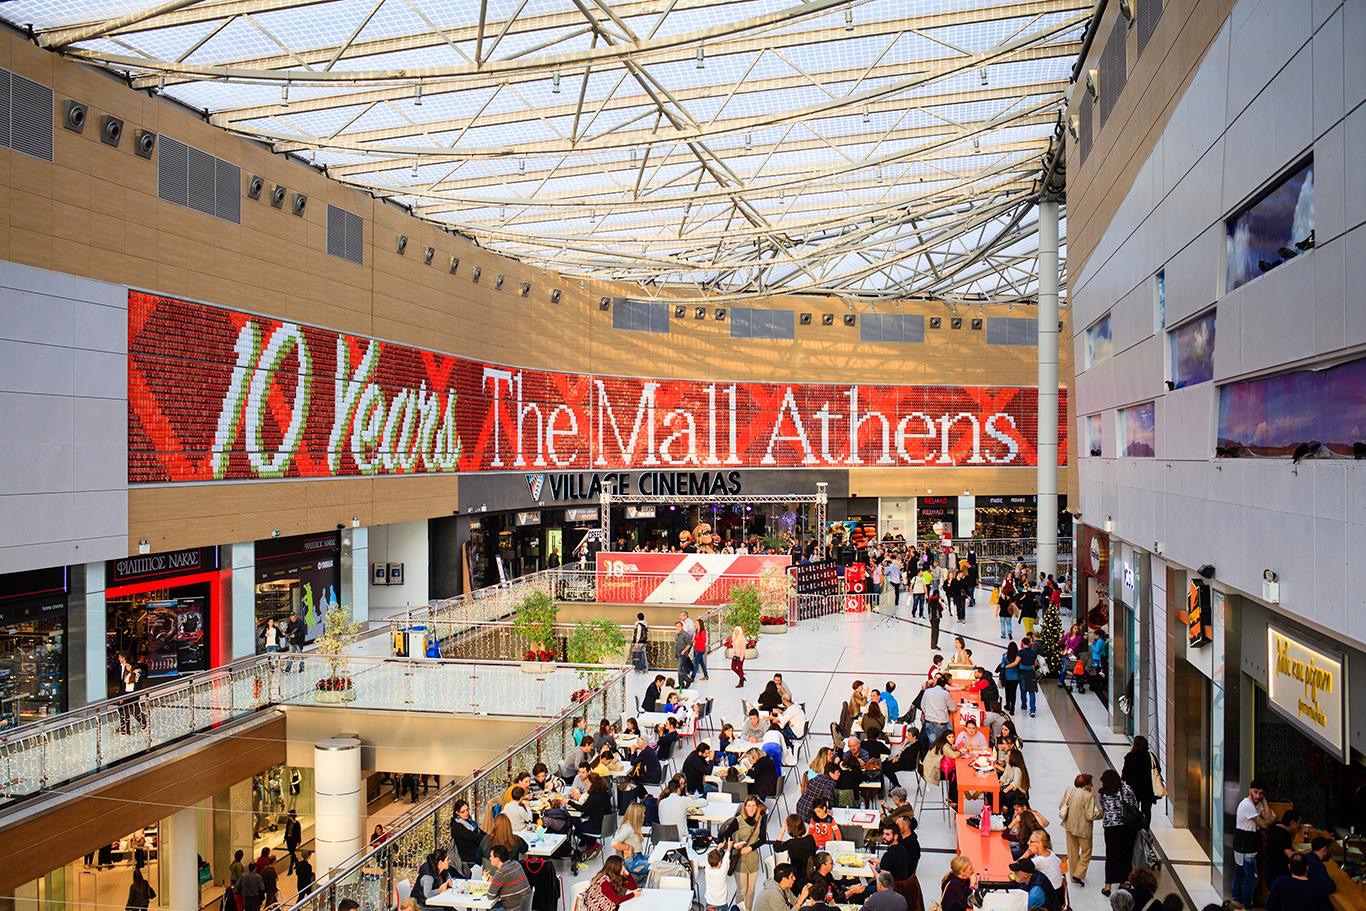  The Mall Athens 